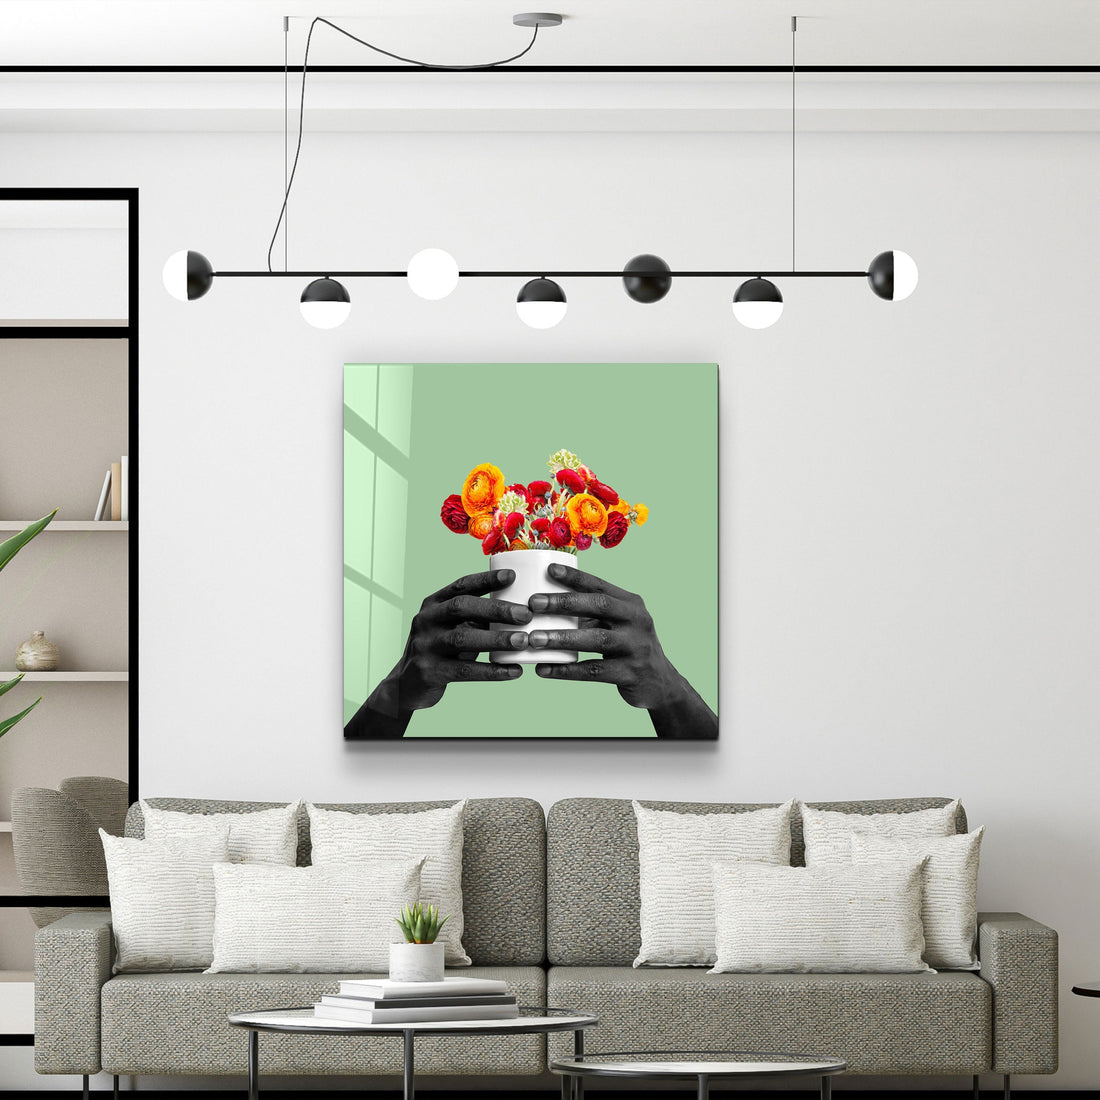 ."Holding the Flower - Green". Contemporary Collection Glass Wall Art